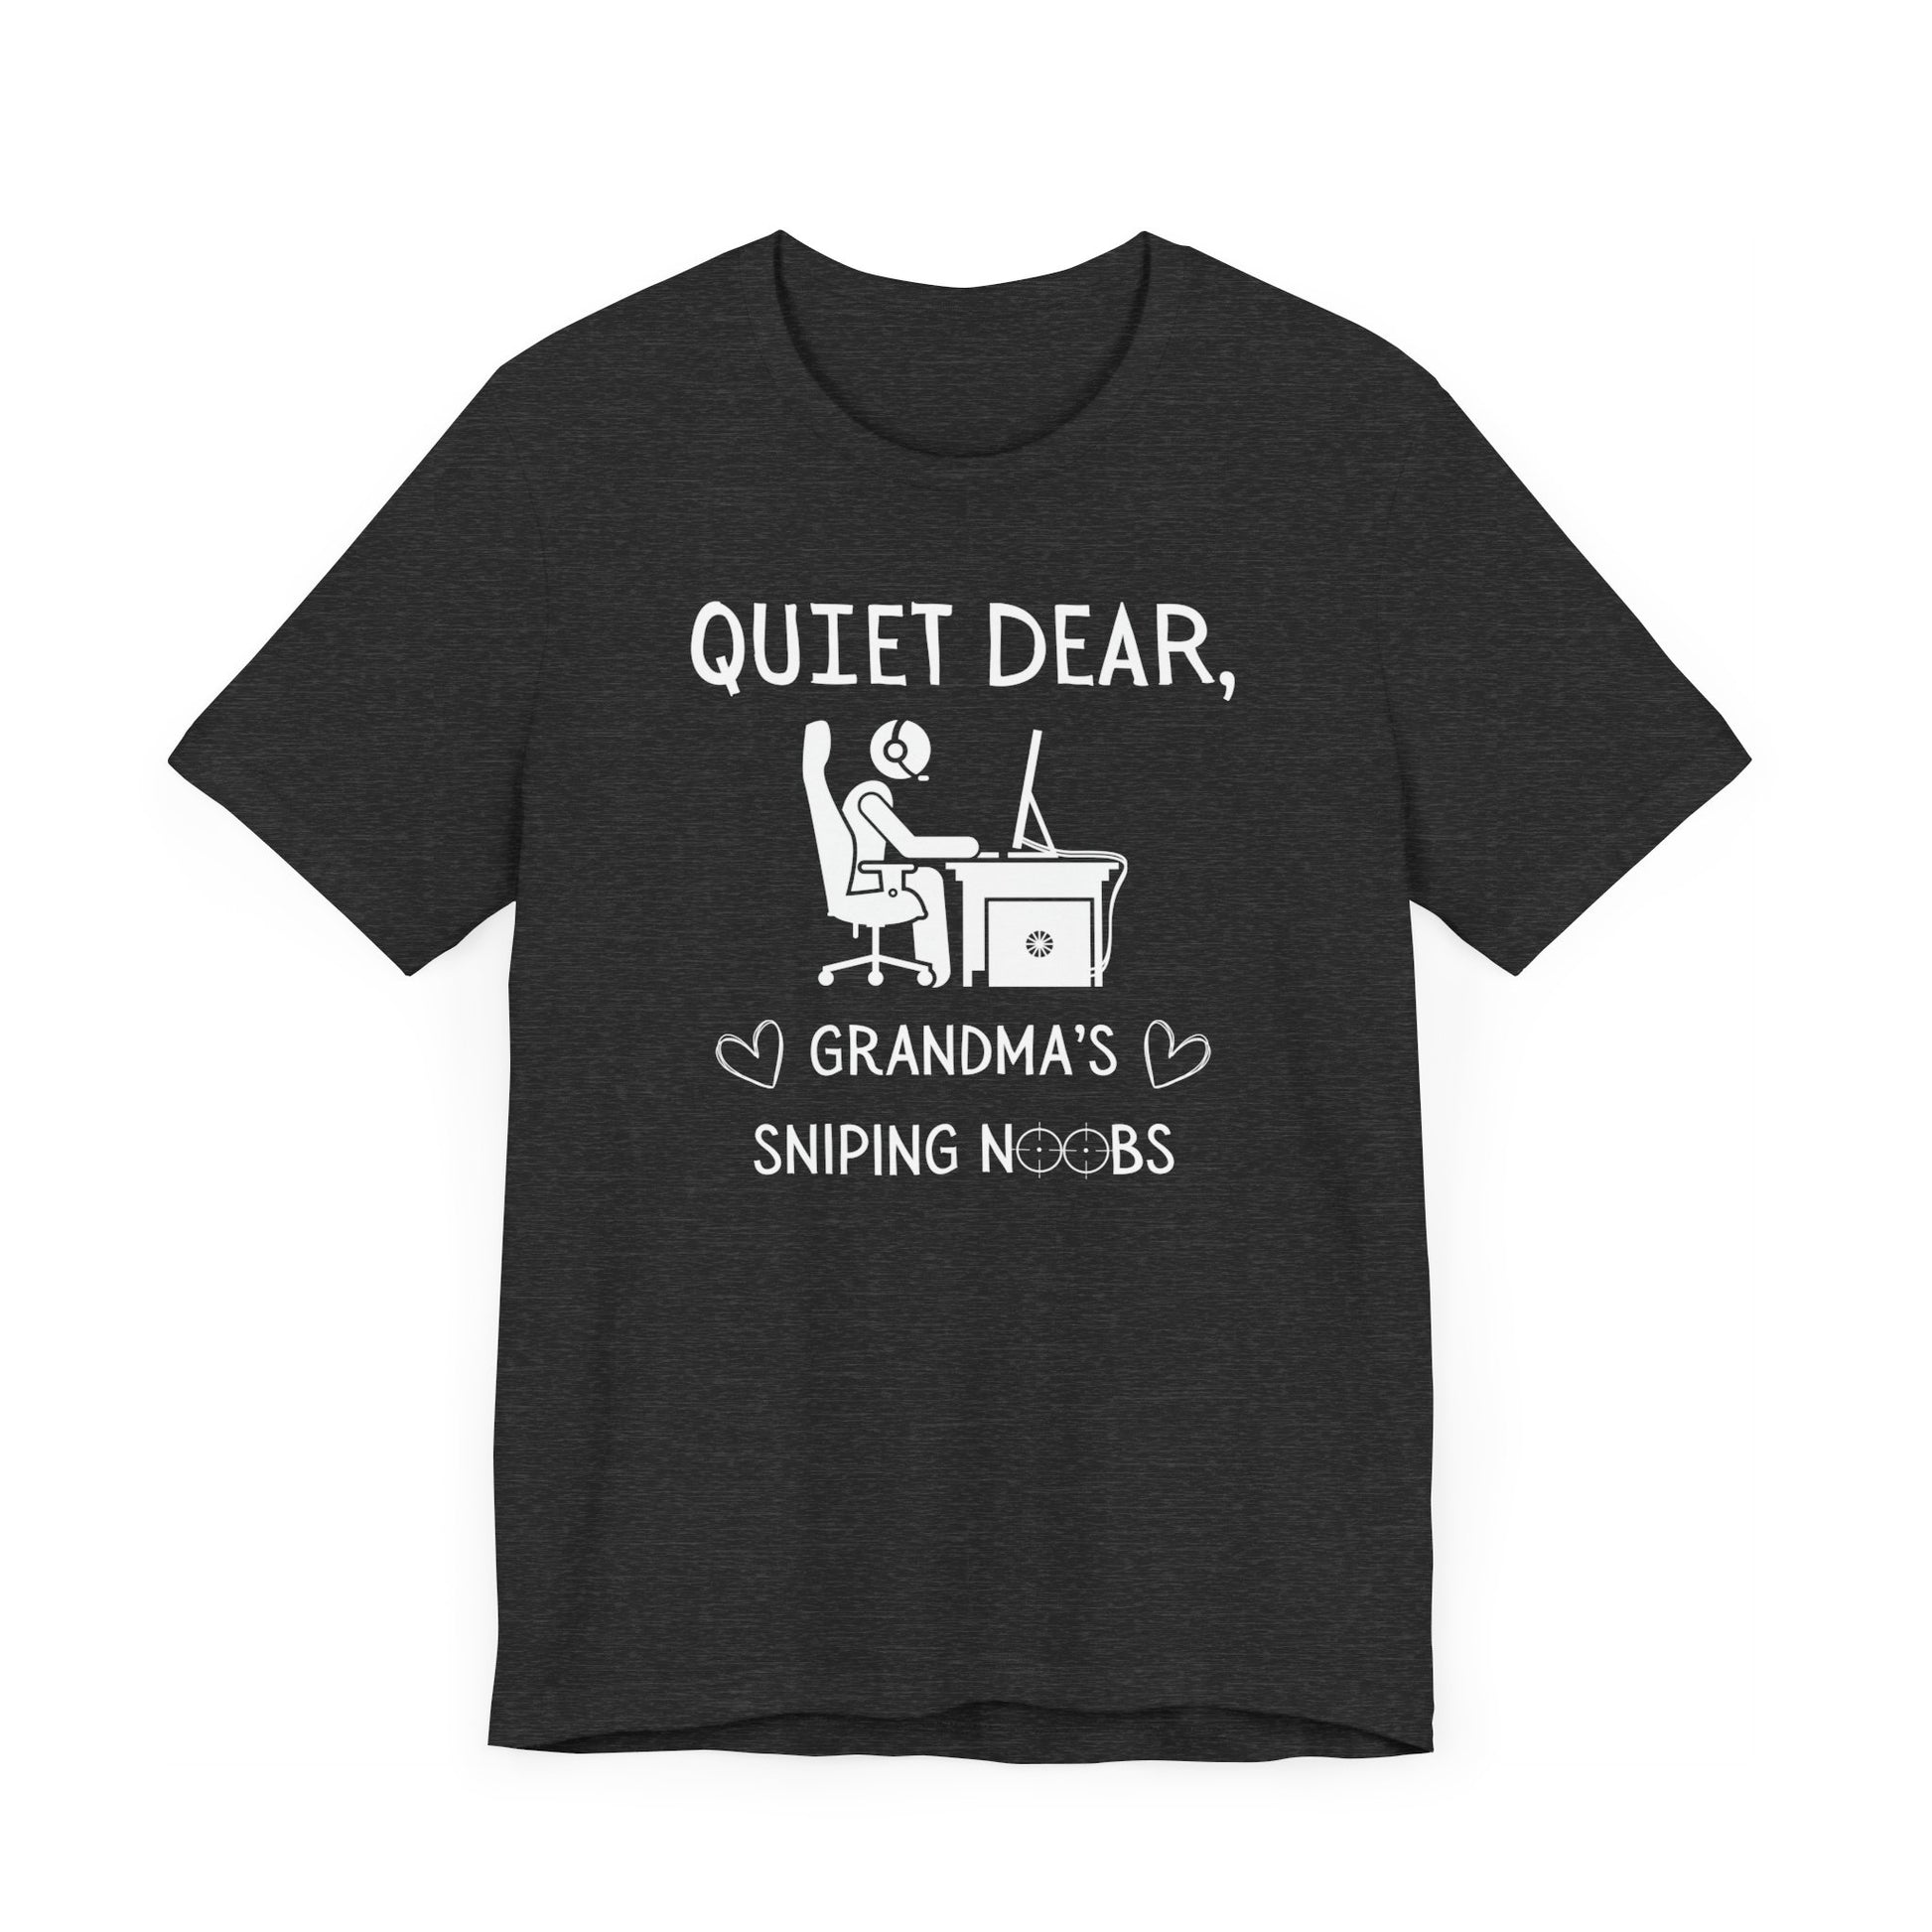 A flat image of a dark gray heather t-shirt that reads Quiet Dear, Grandma's Sniping Noobs in white text. The lower text is framed by two hearts, and the O's are in the shape of sniper scopes. In the center of the shirt is an image of a person at a desk with a gaming PC.